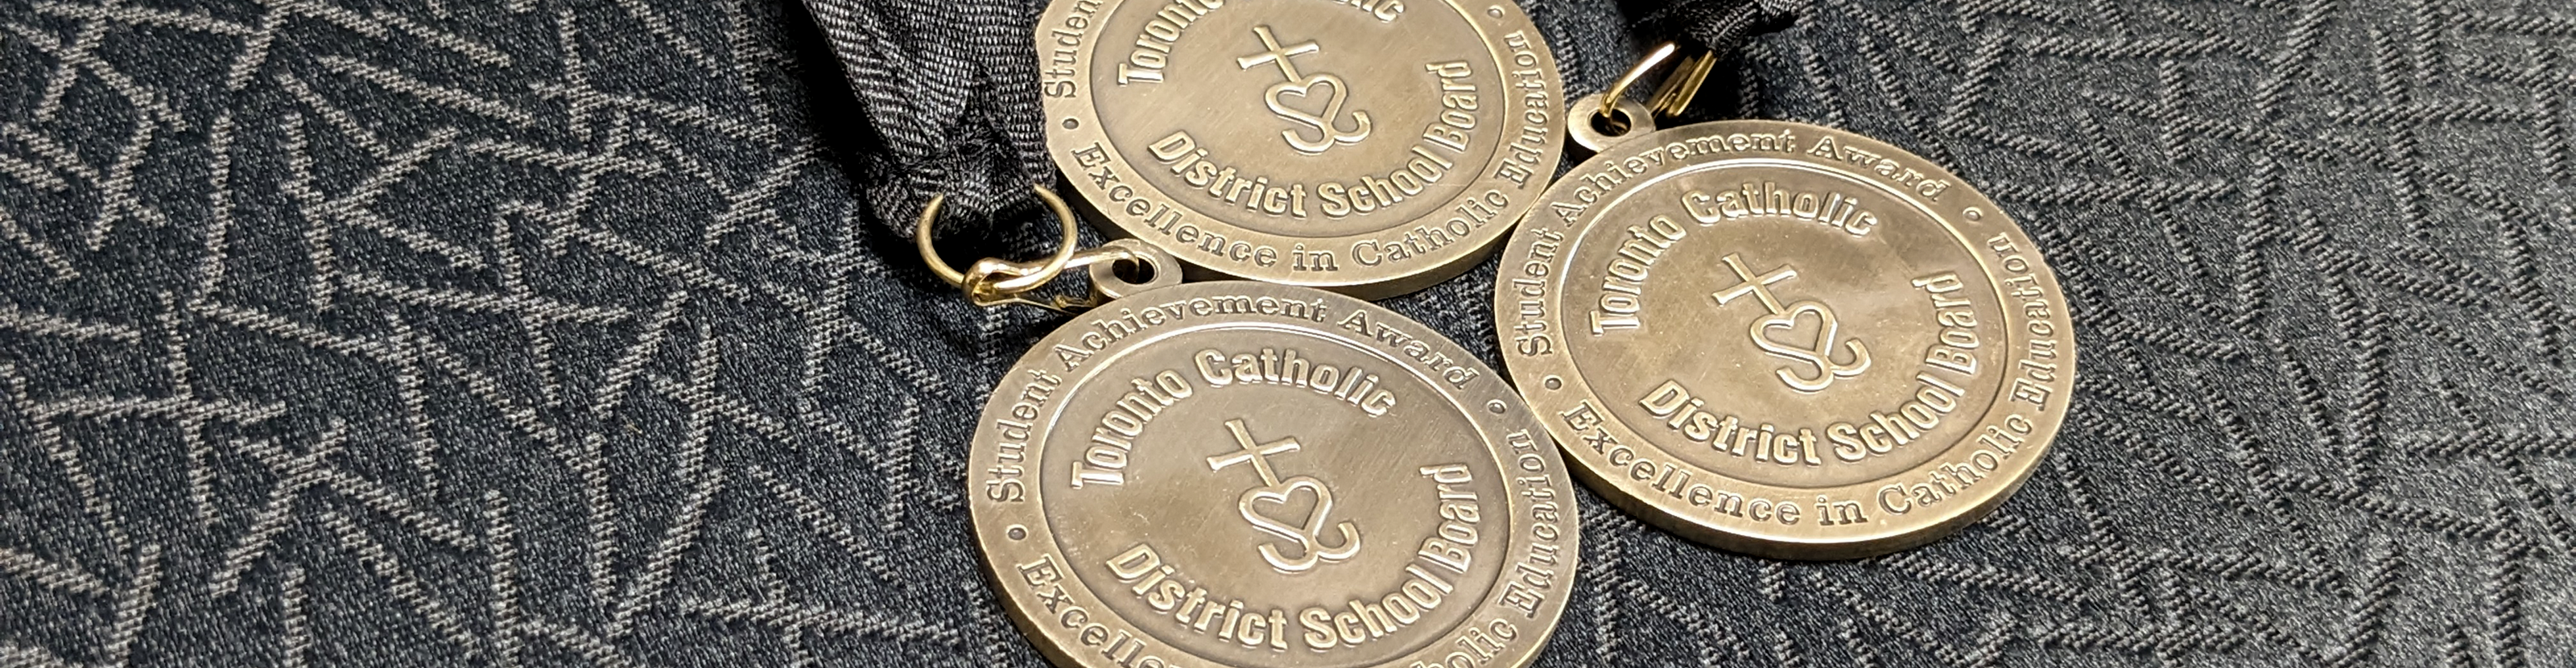 Photo of three TCDSB Student Achievement Award medals lying on a grey fabric background.